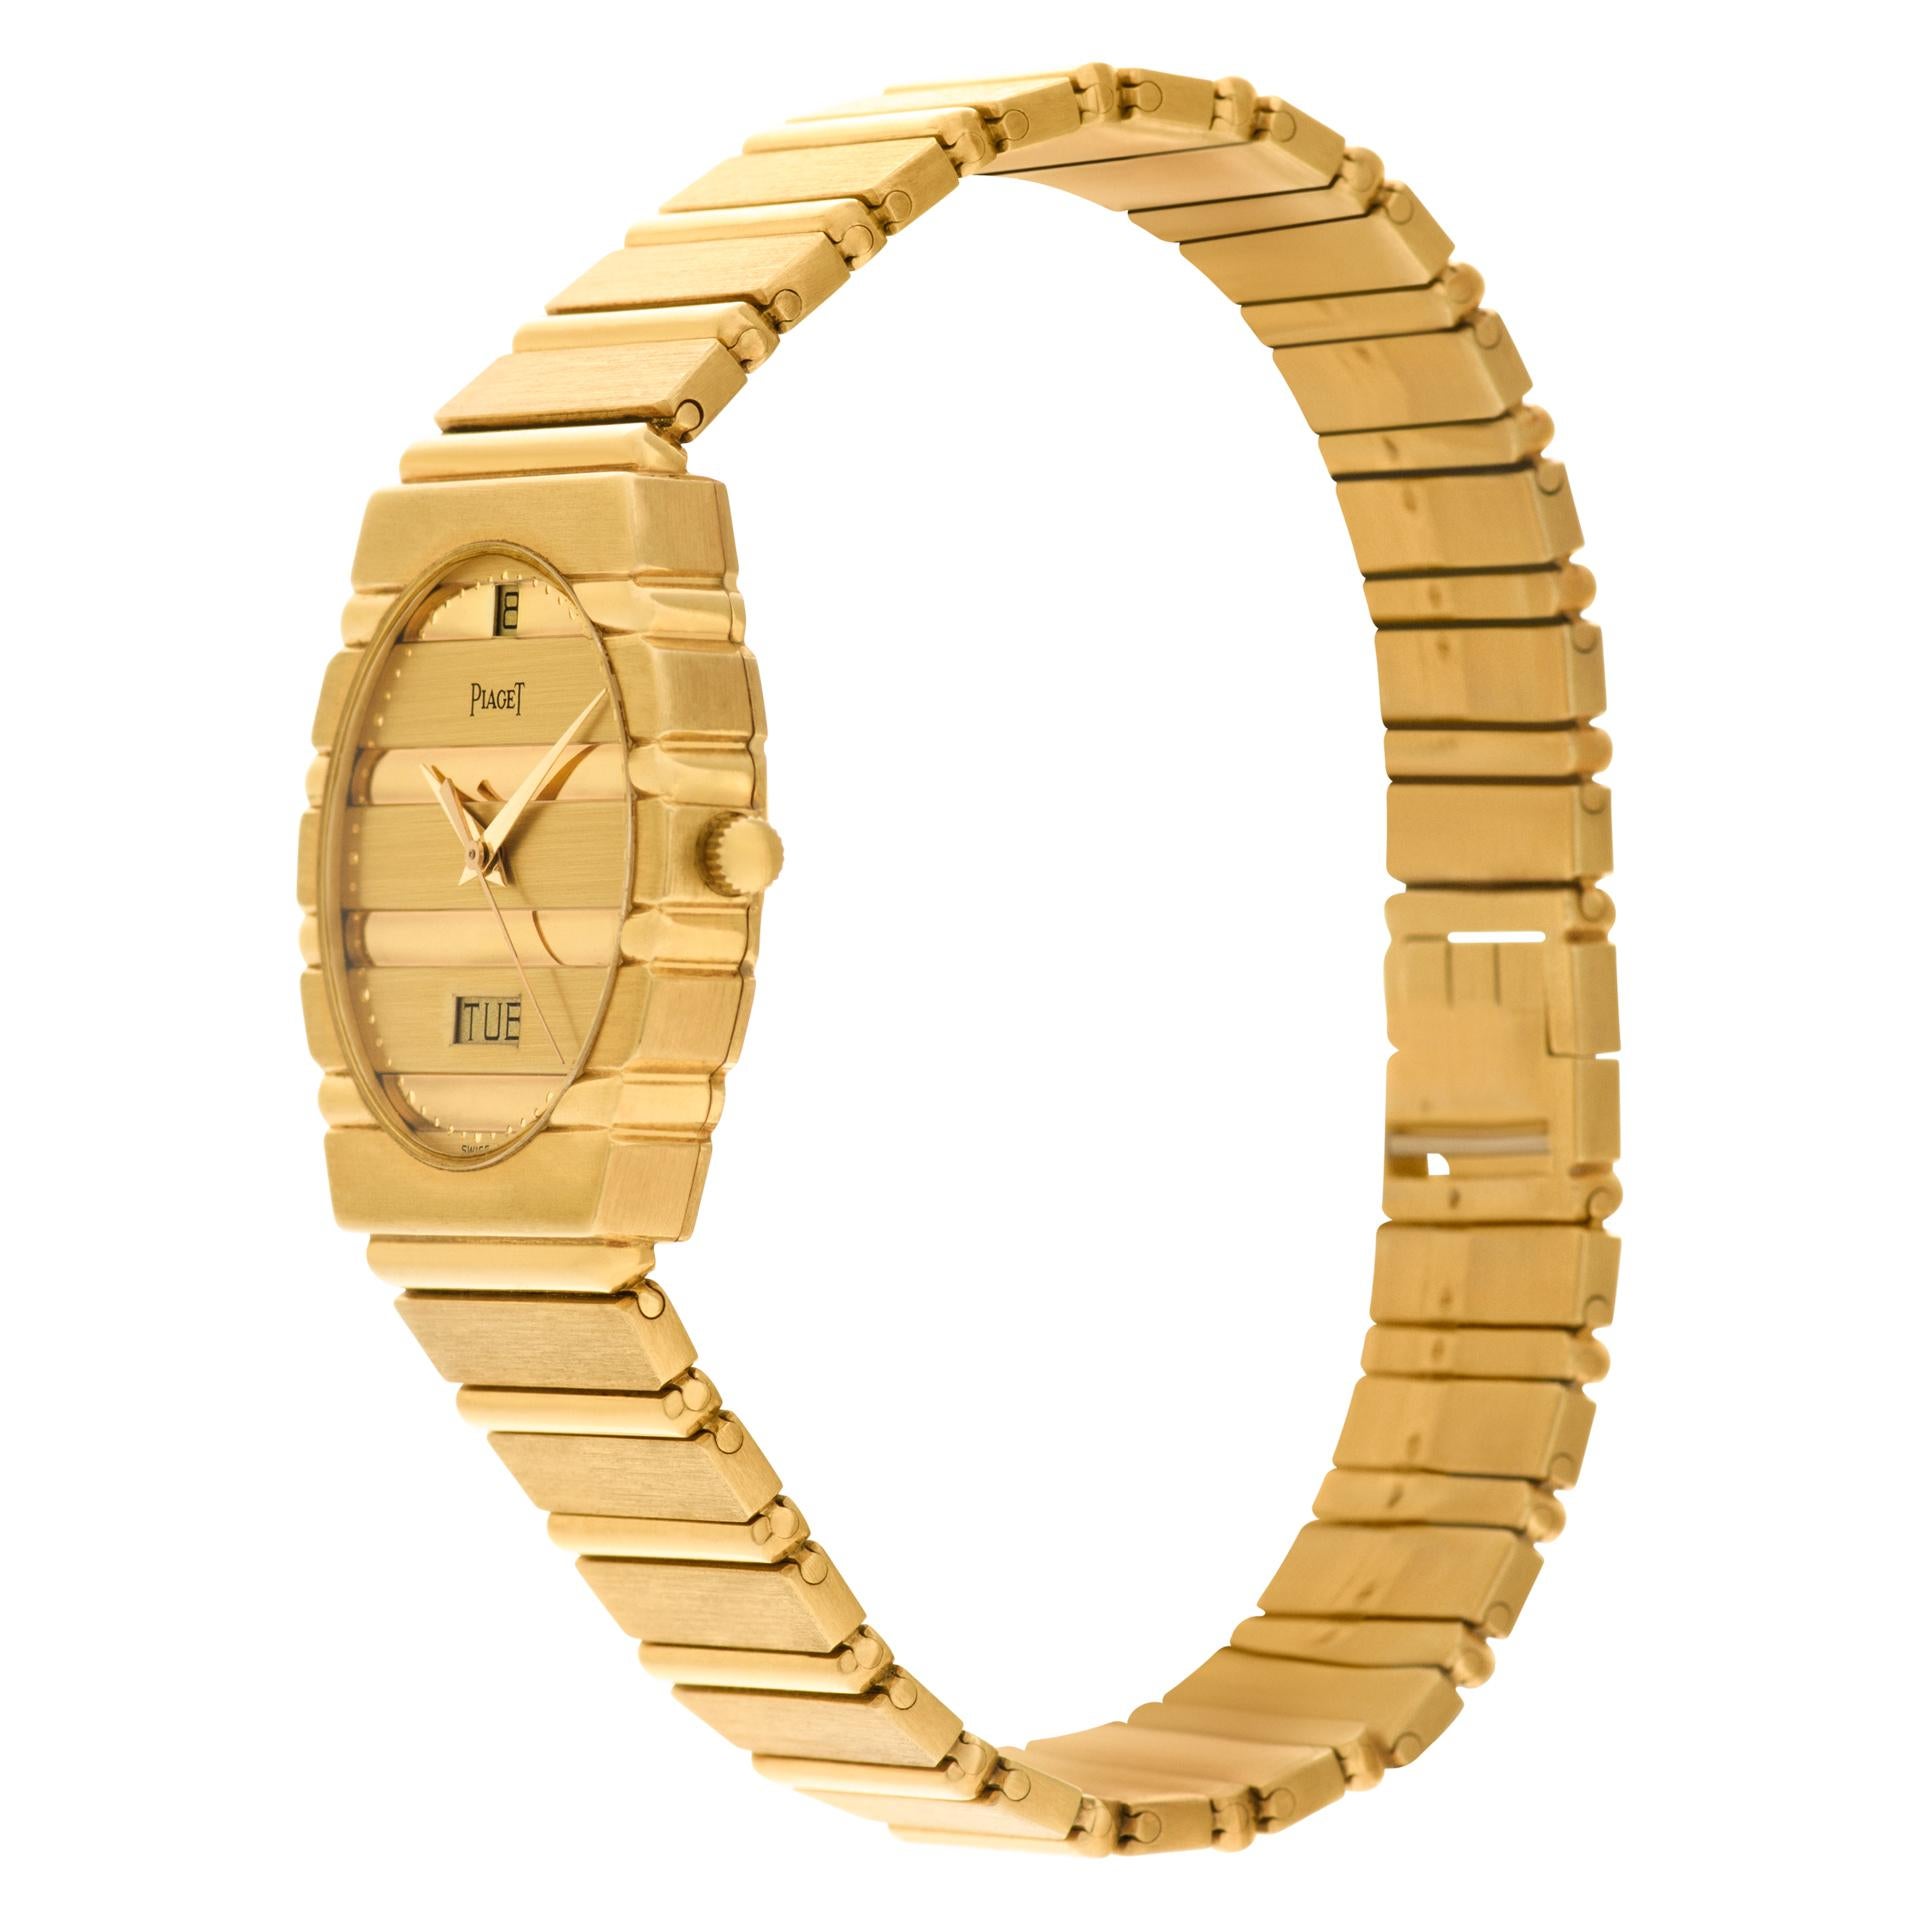 Piaget Polo in 18k yellow gold. Quartz w/ sweep seconds, date and day. 31 mm case size. Ref 15562c701. Circa 1980's Fine Pre-owned Piaget Watch. Certified preowned Dress Piaget Polo 15562c701 watch is made out of yellow gold on a 18k bracelet with a